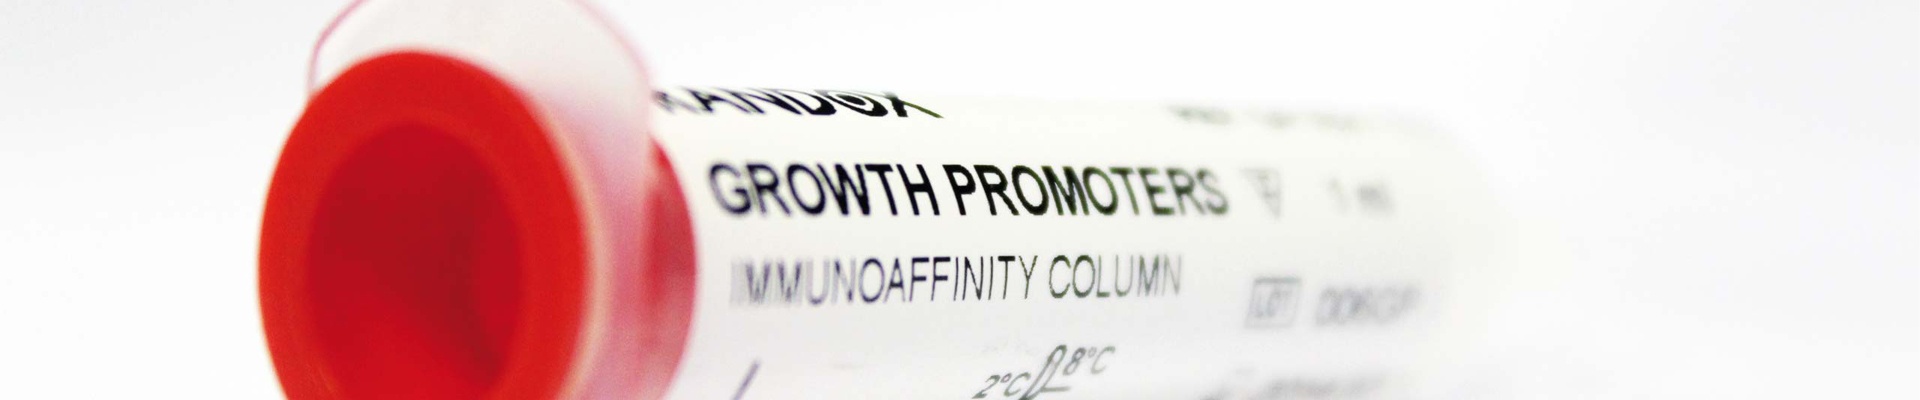 Growth Promoters